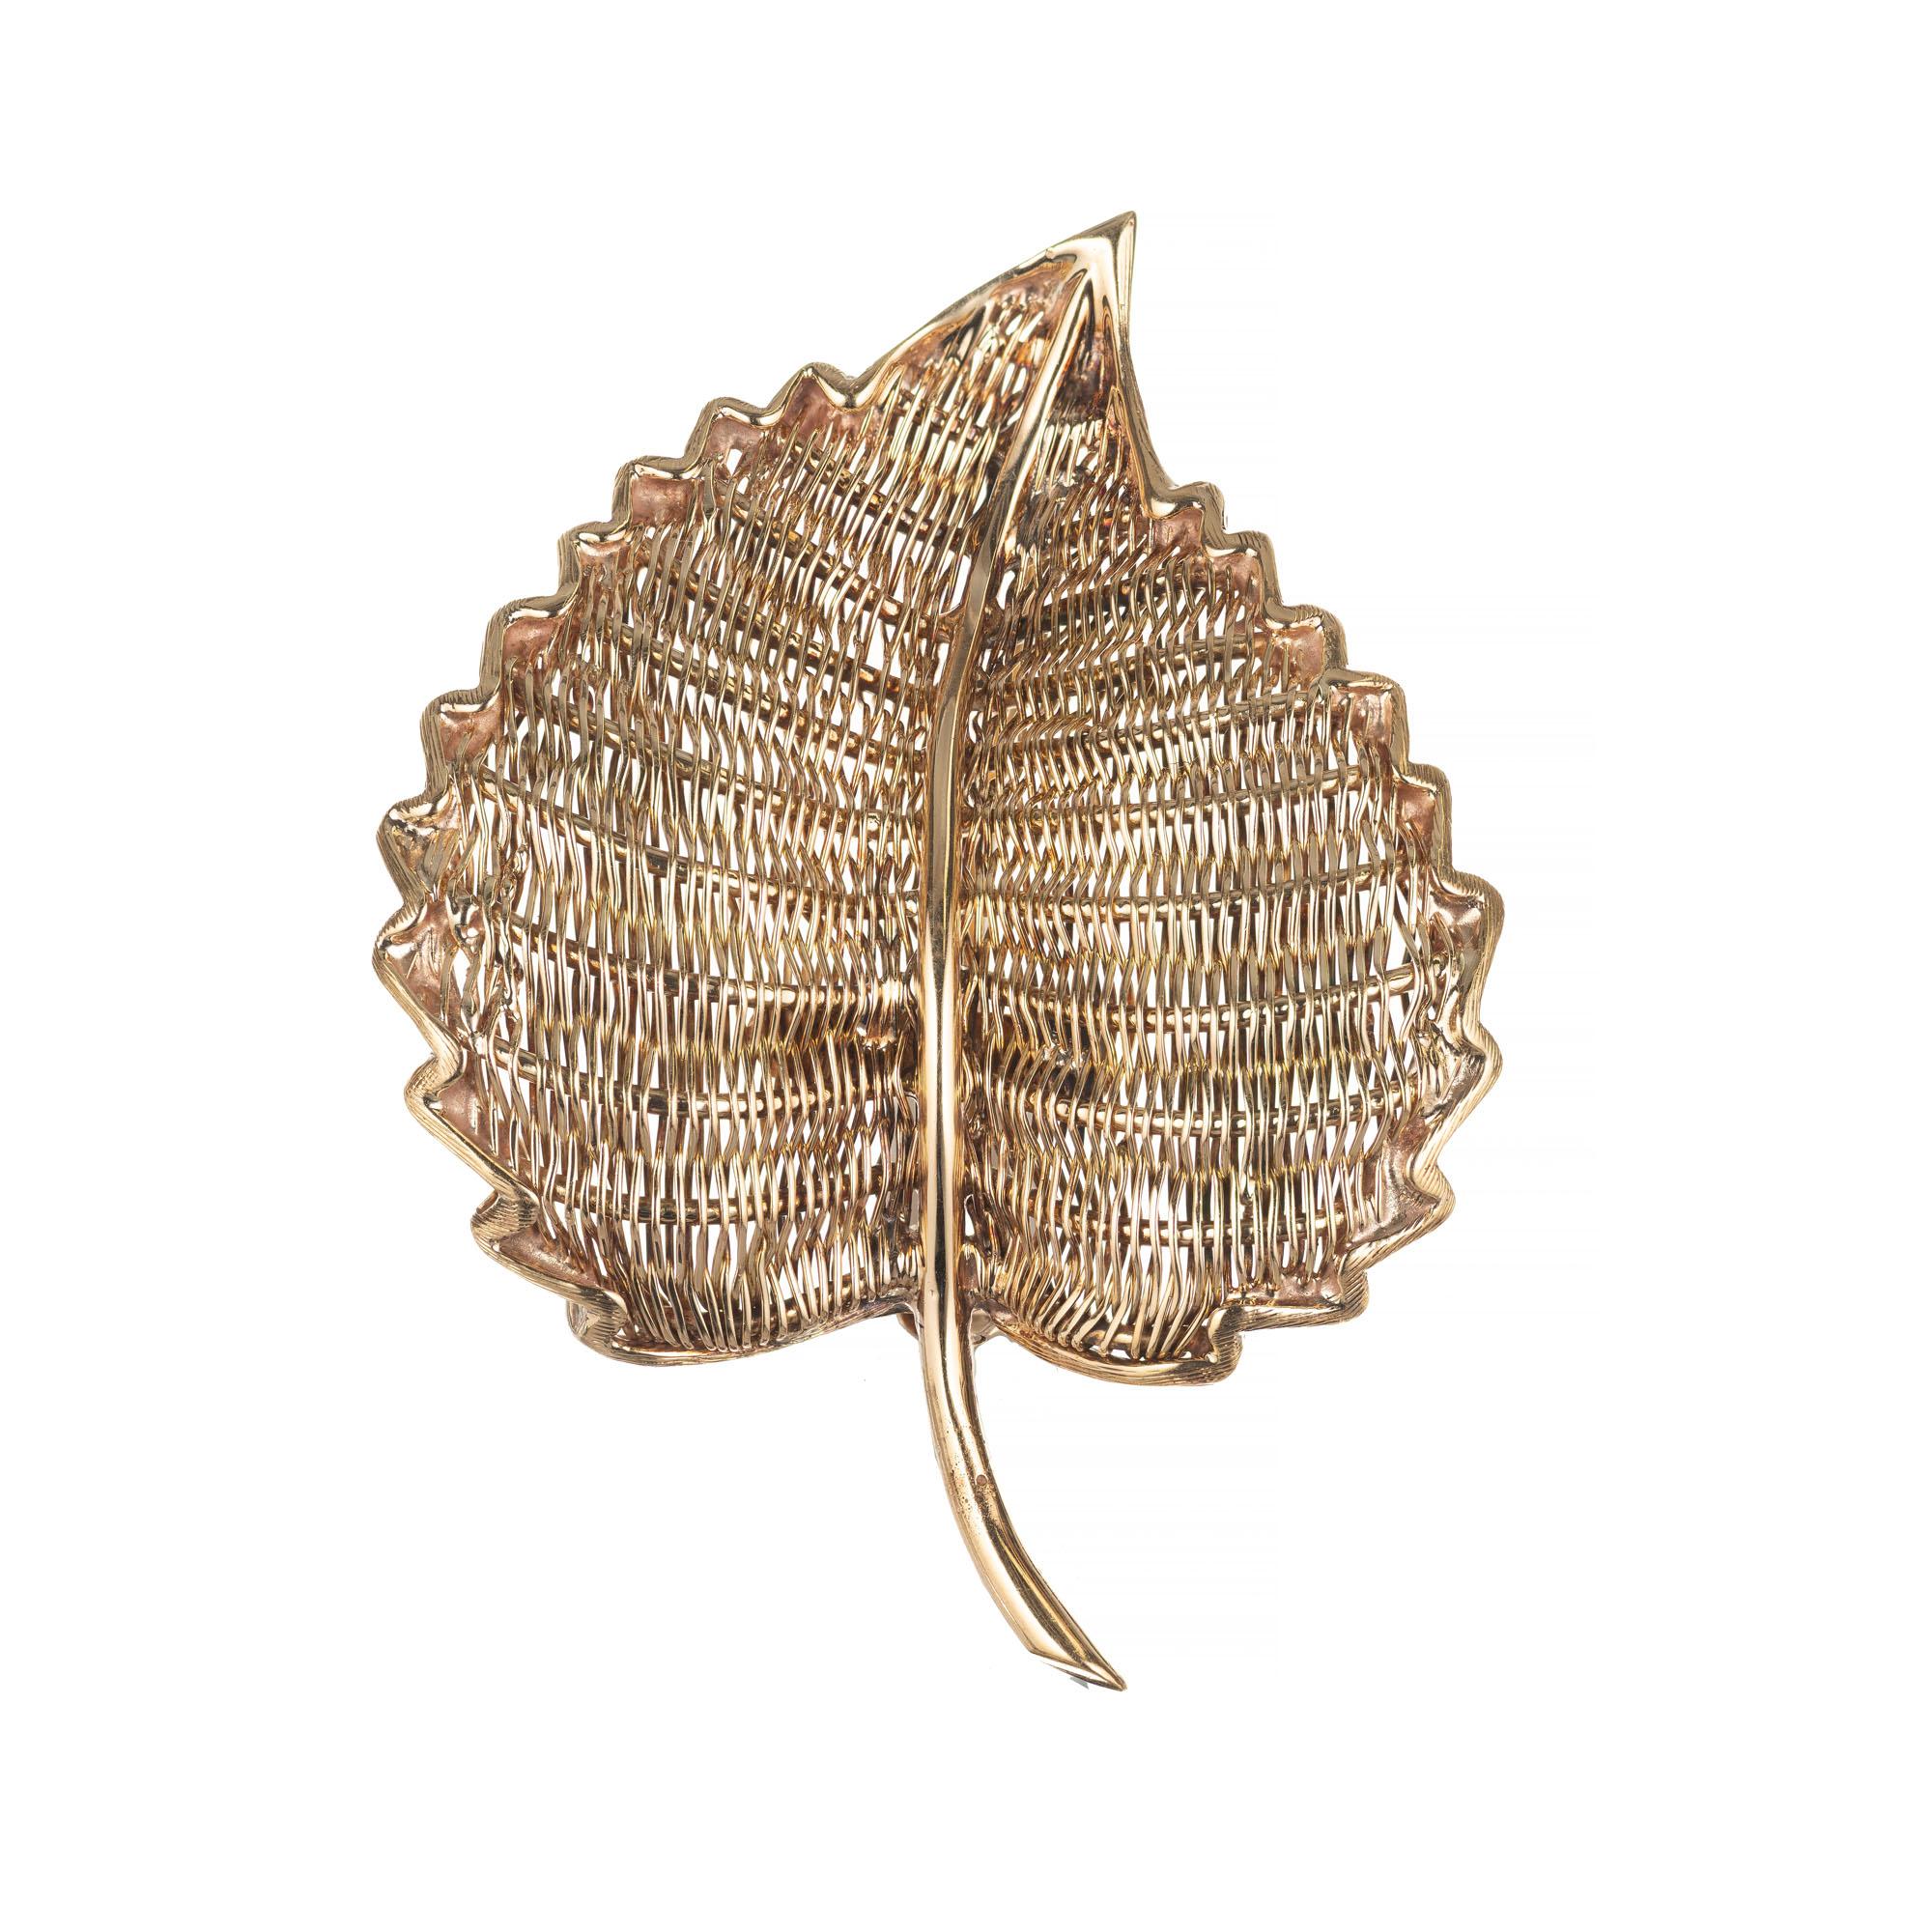  Tiffany & Co. yellow gold woven wire leaf brooch. Woven front and back to create the leaf design. Signed Tiffany & Co Italy, 18k. Circa 1950-1960.

18k Yellow Gold
Stamped 18k Tiffany + Co Italy
9.9 grams
1 7/8 x 1 3/8 inches.